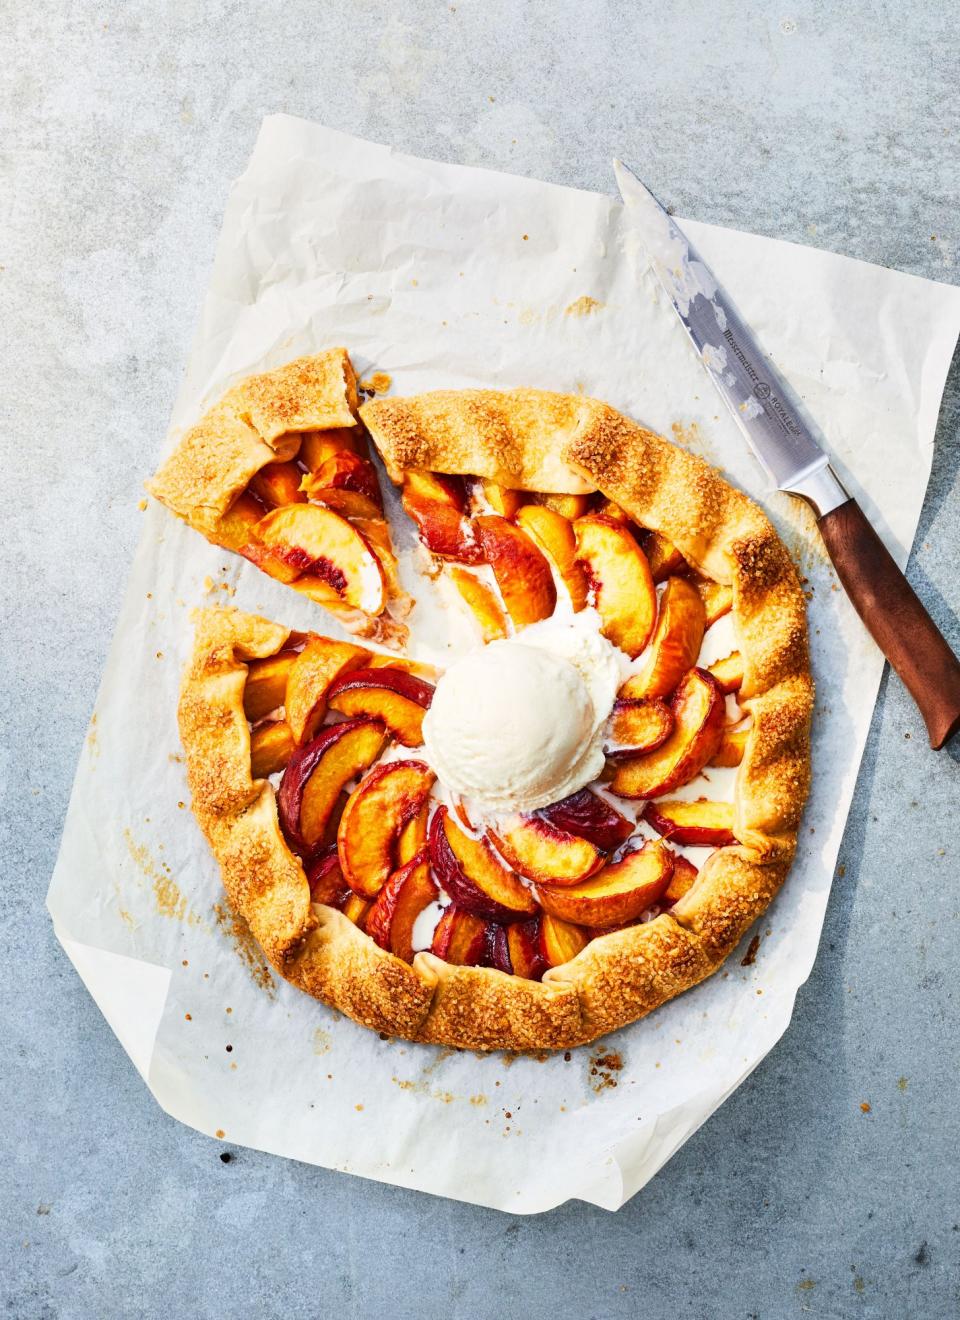 Gingered Peach Galette